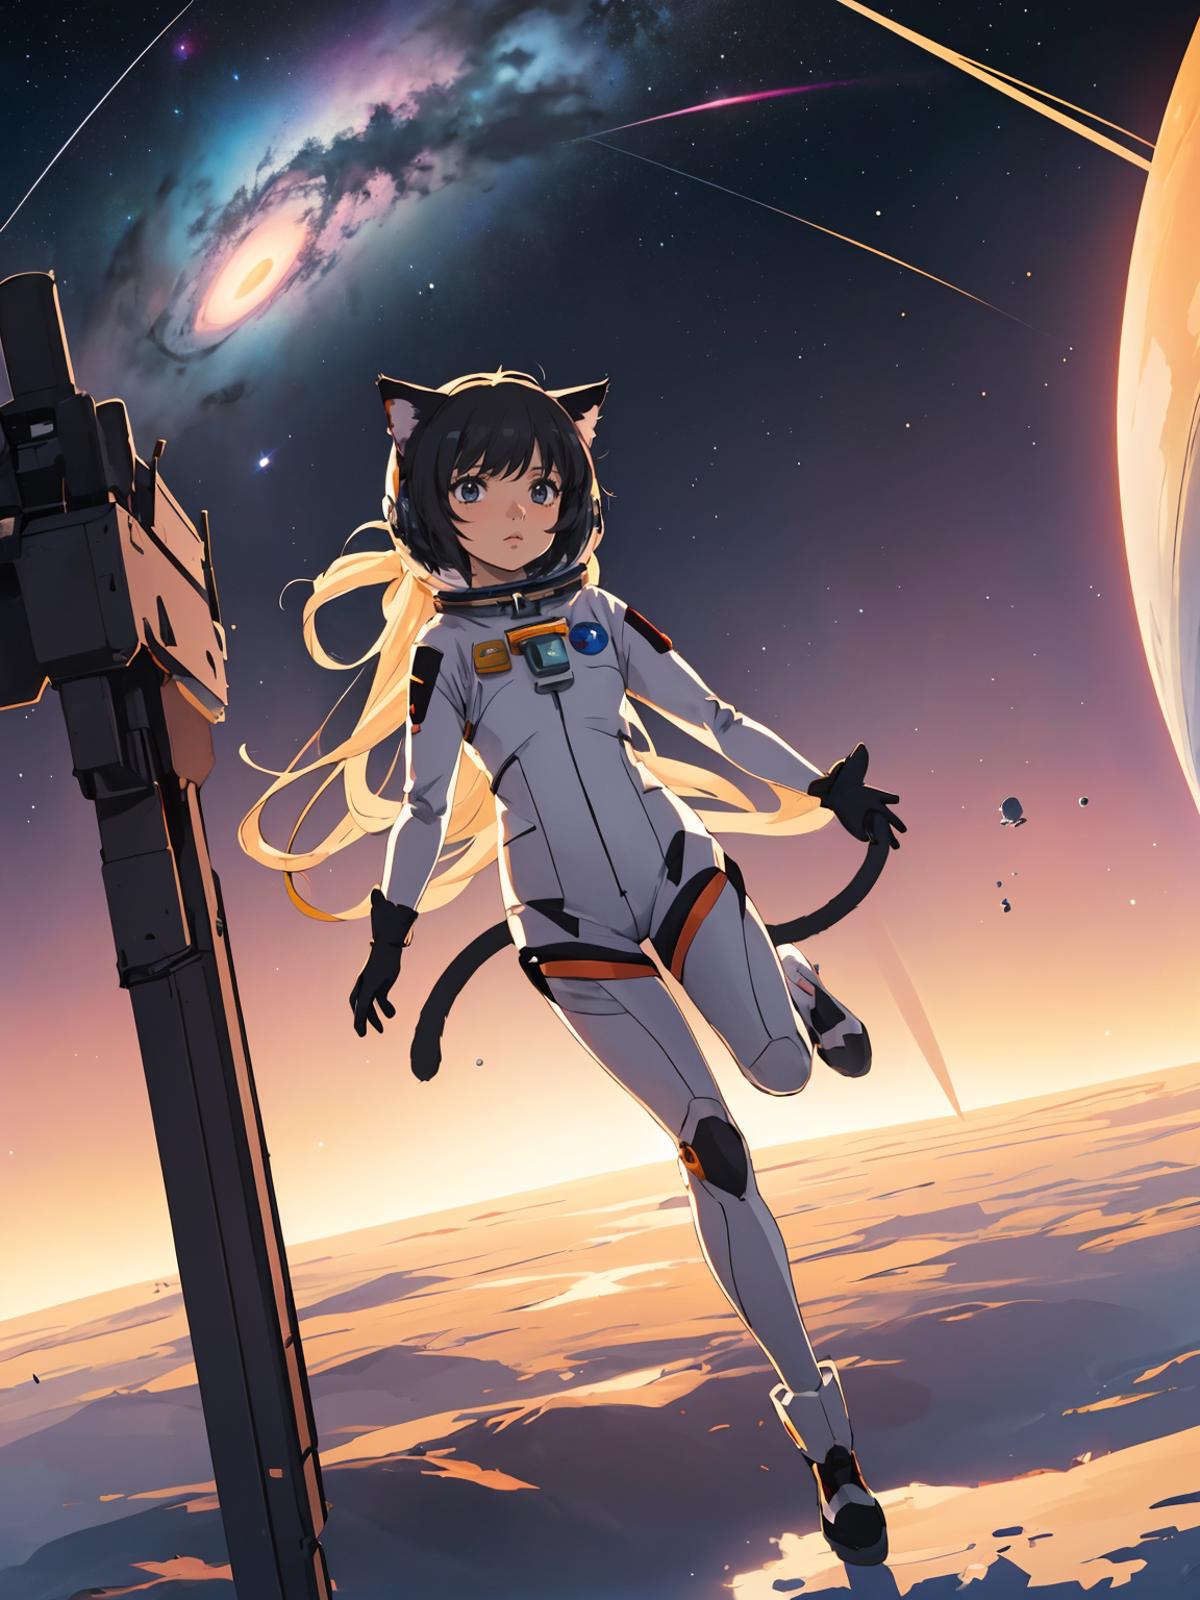 The Artist's Interpretation of a Space Cat: A Girl in a Spacesuit with Cat Ears and Tail